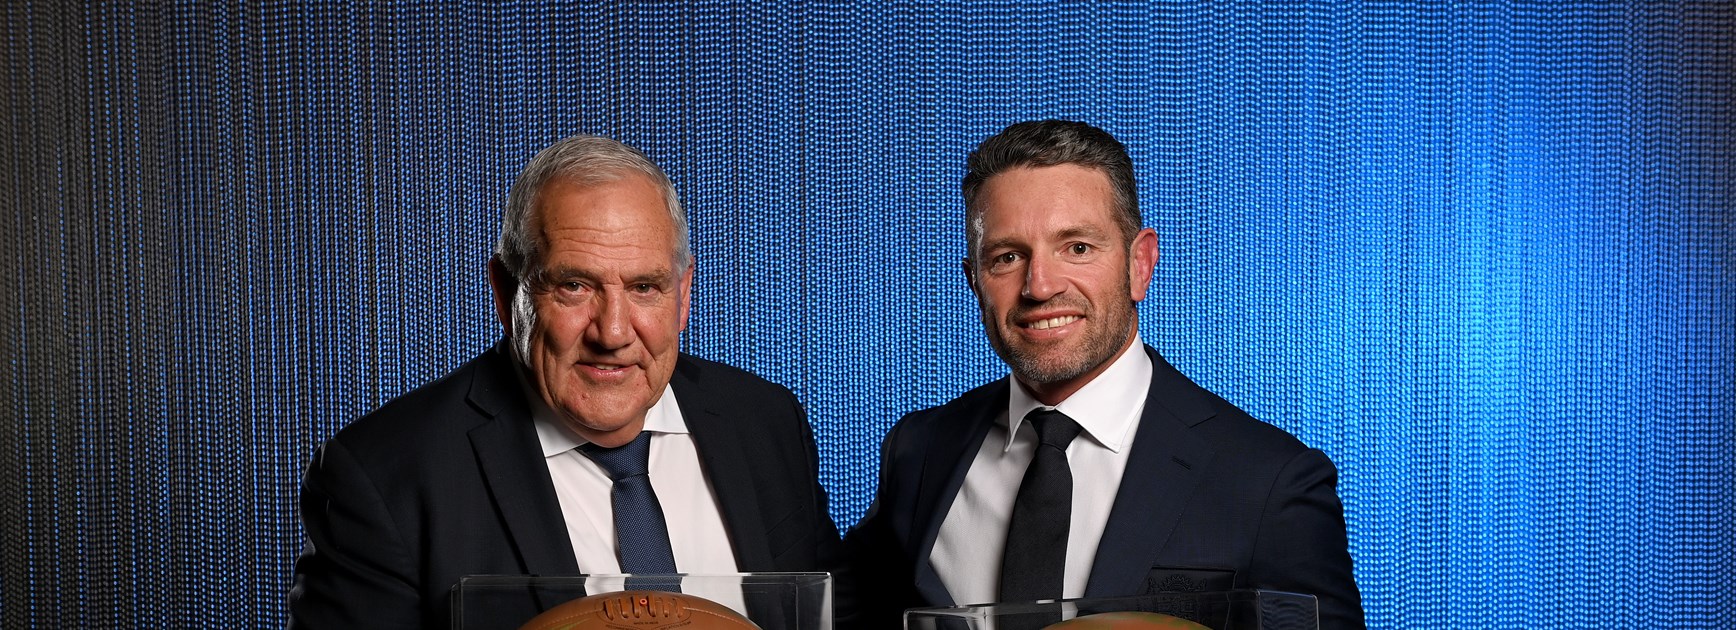 Five players inducted into the NSWRL The Star Hall of Fame